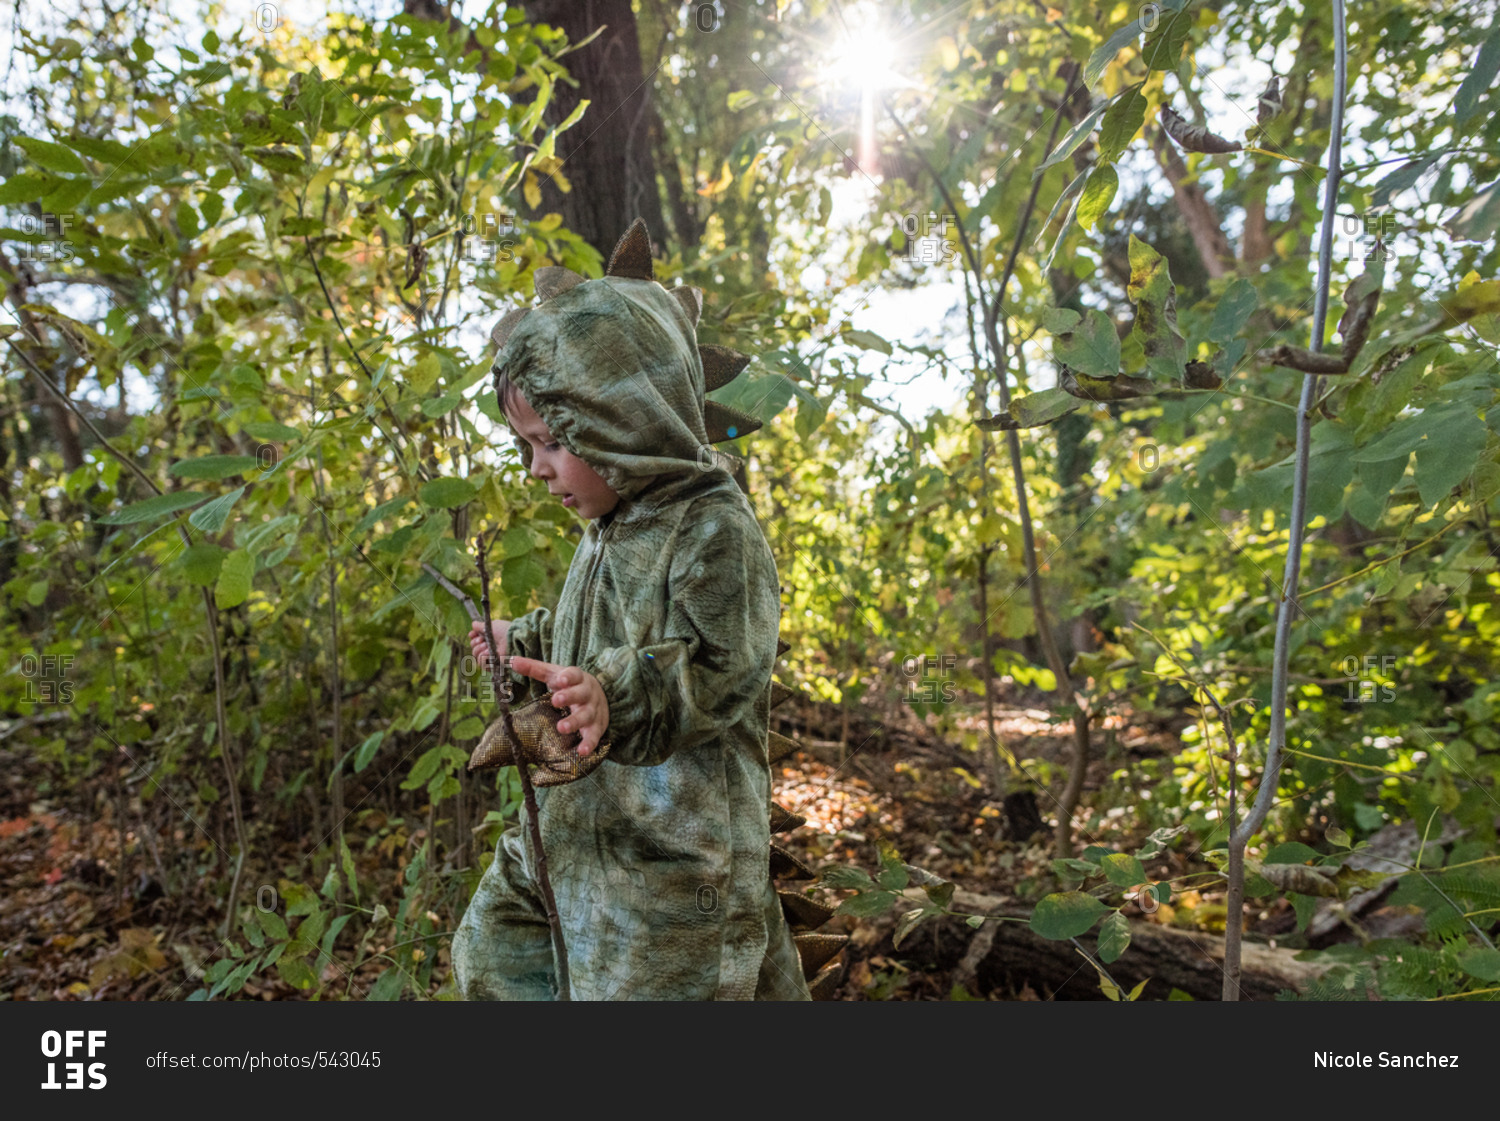 Little boy in a dinosaur costume playing in the woods